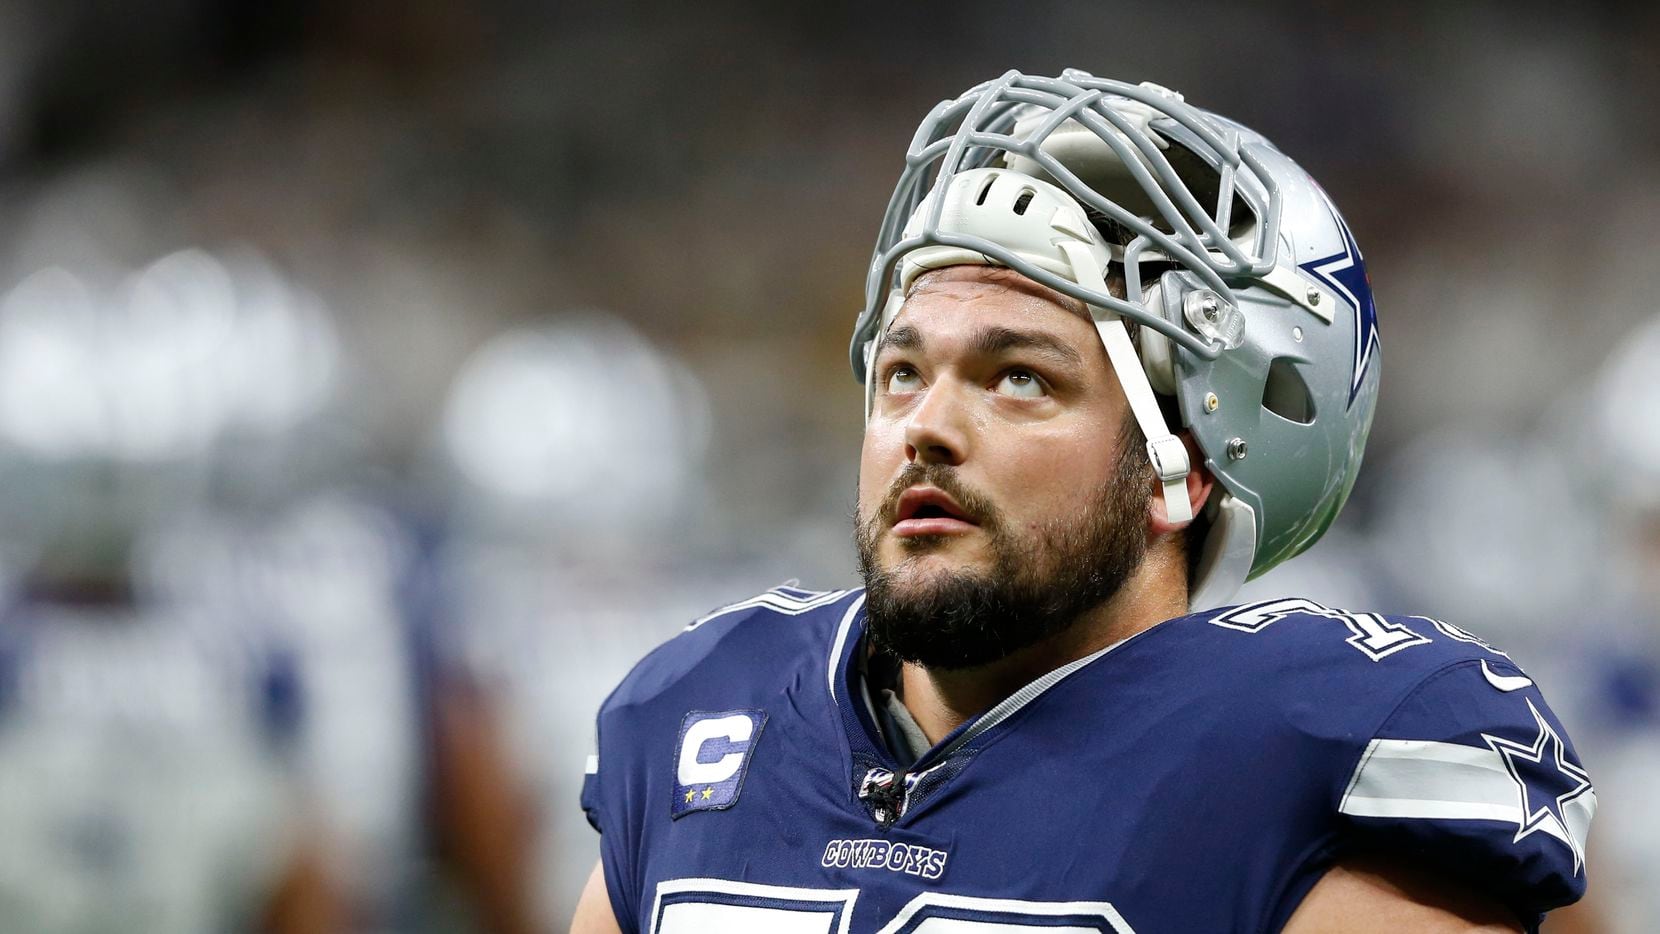 Dallas Cowboys offensive guard Zack Martin (70) looks up as he exits the field after warmups before a game against the New Orleans Saints at the Superdome in New Orleans, Louisiana on Sunday, September 29, 2019.